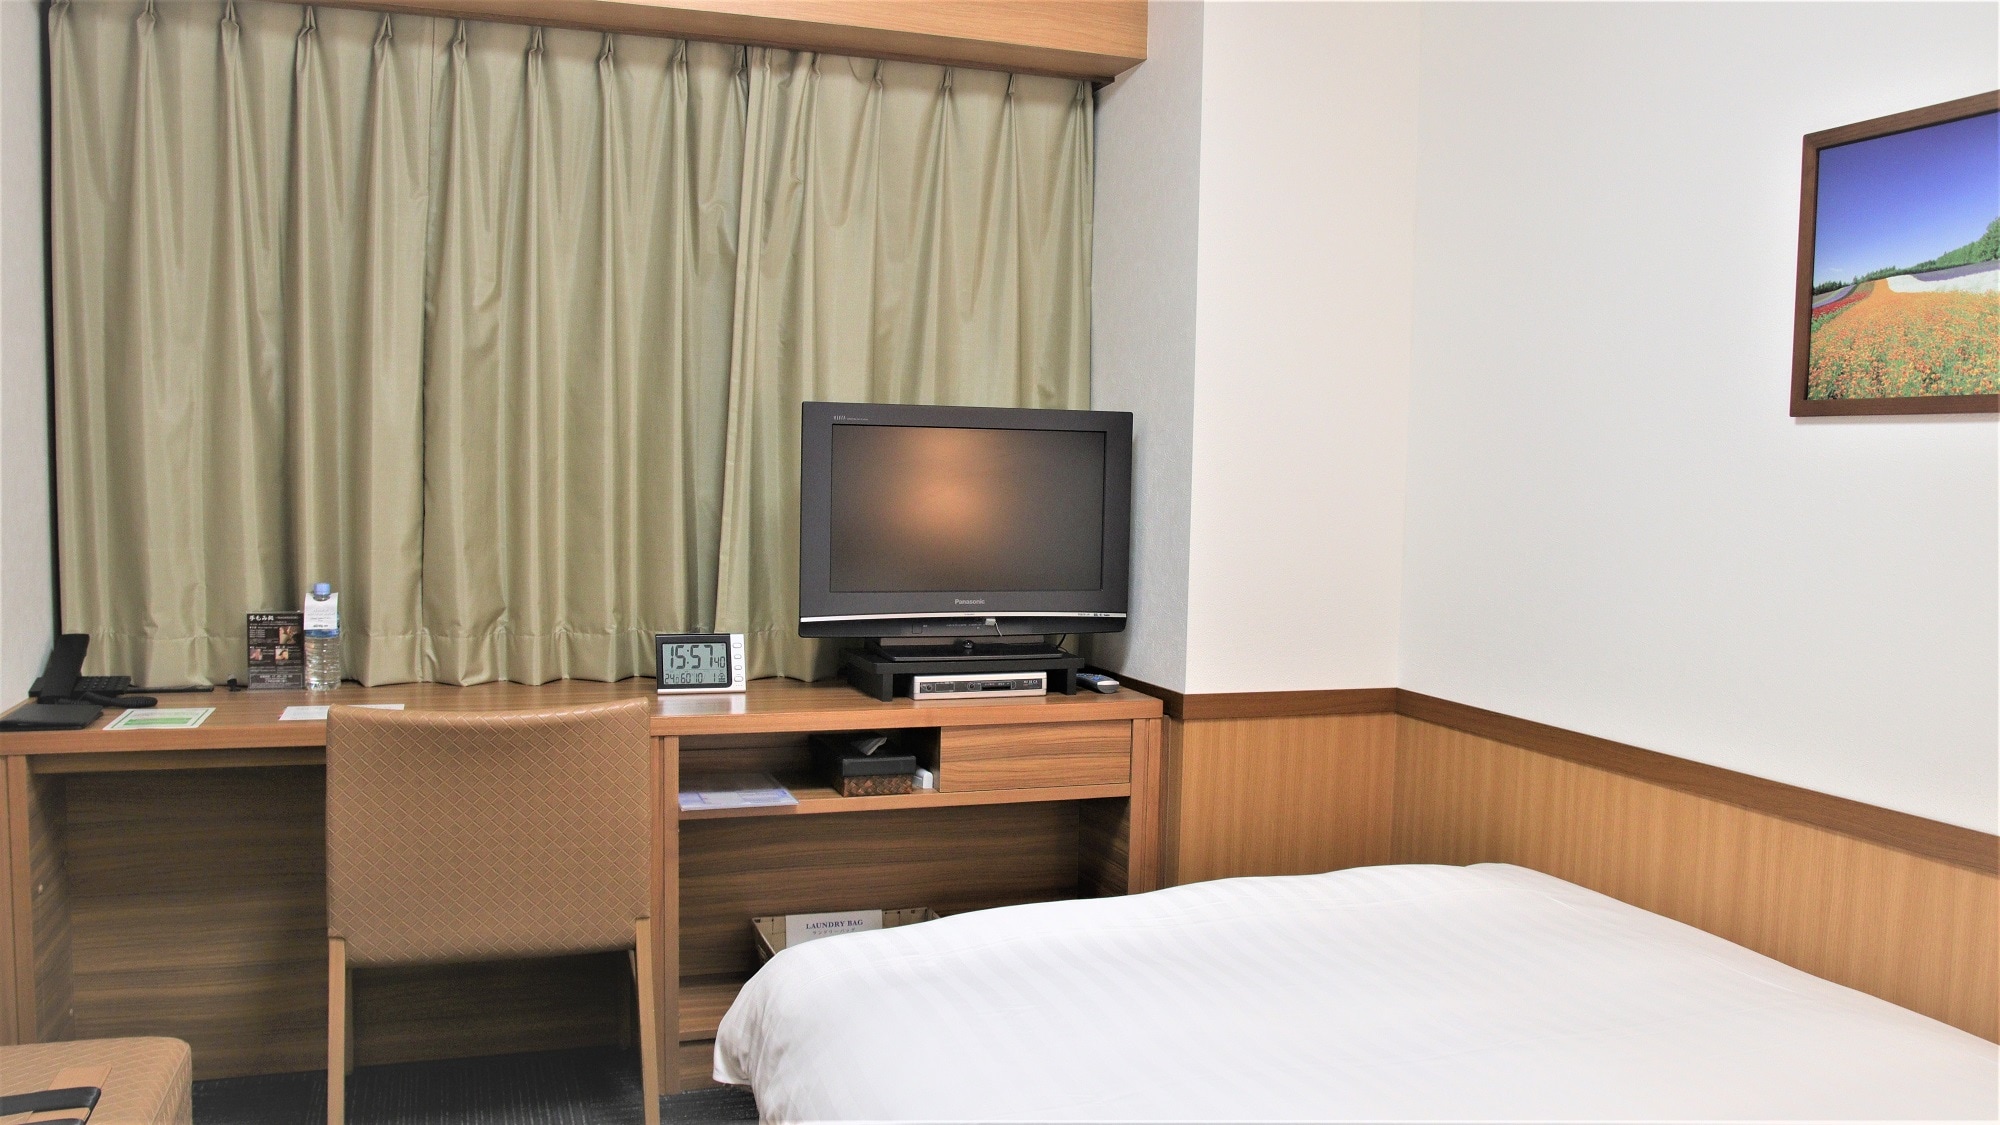 ◆ Double room [No smoking] (Bed size 140 & times; 200cm) 16.0 ~ 16.4㎡